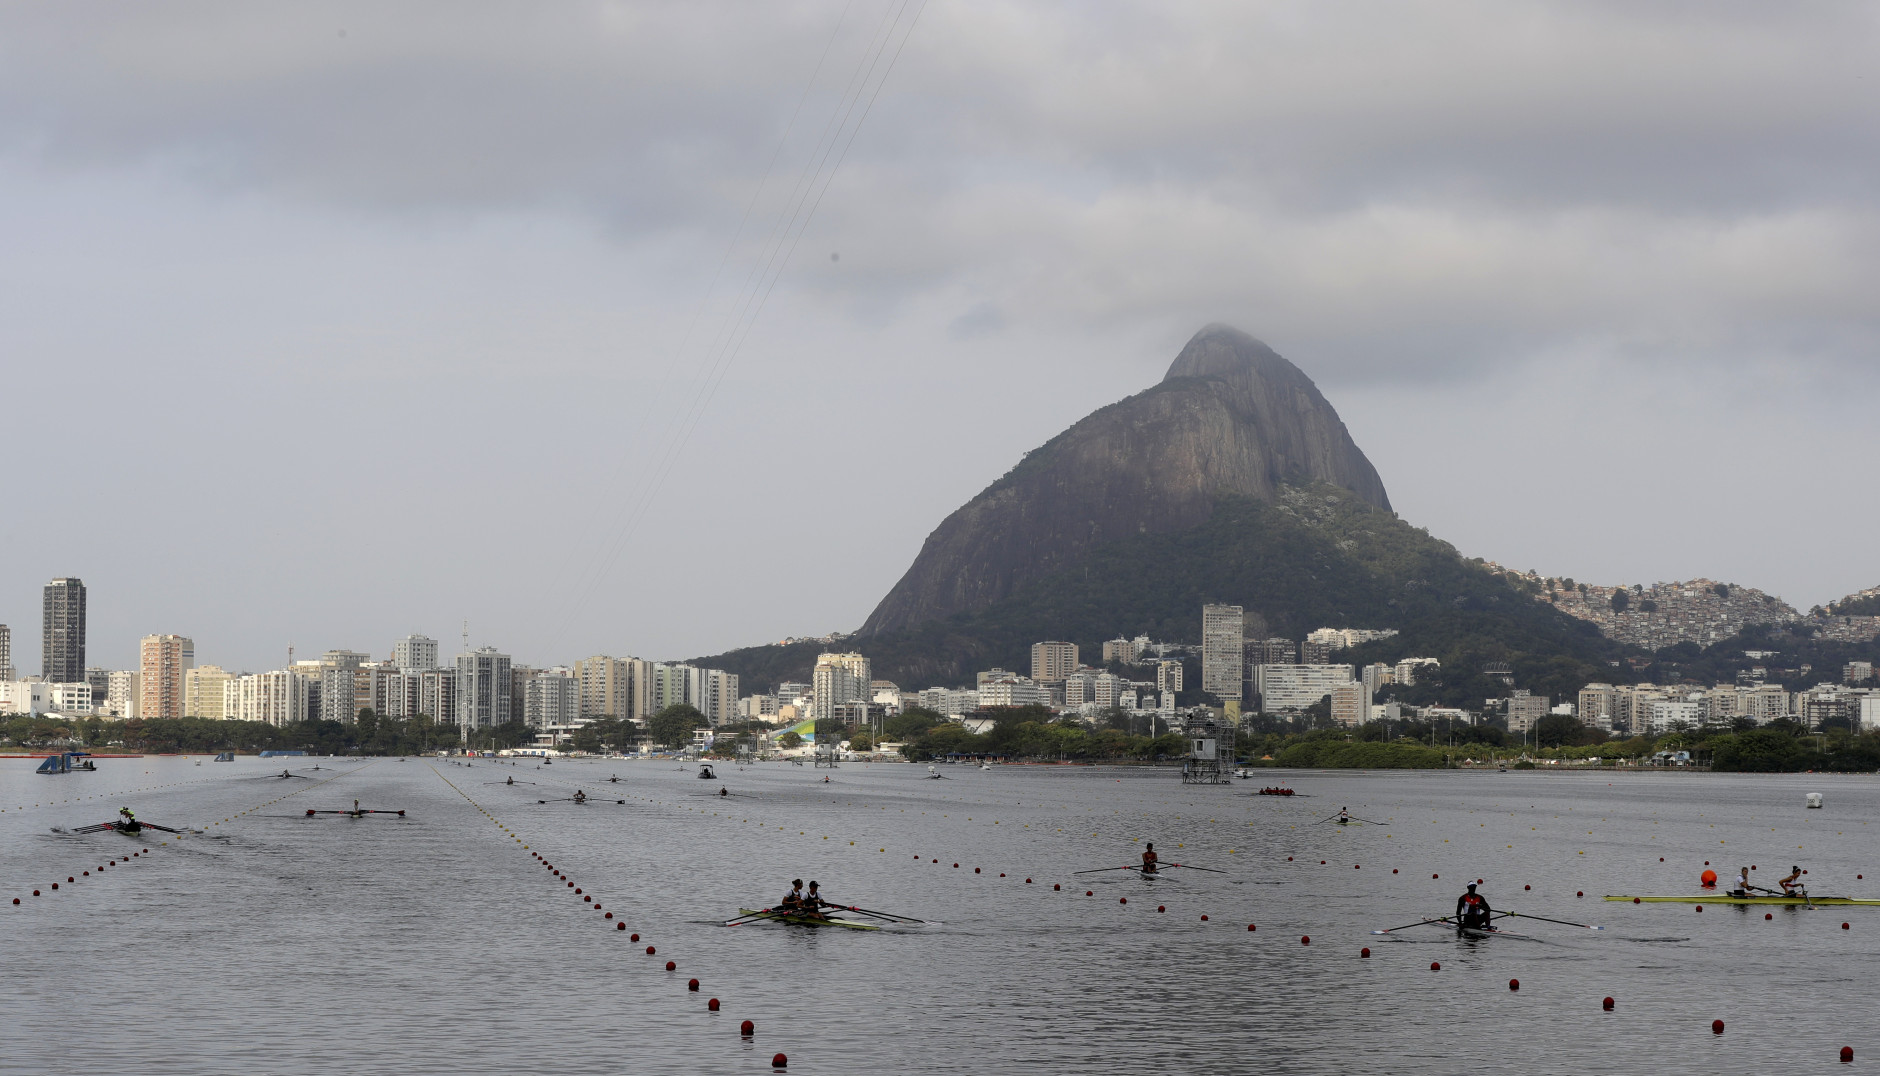 Rowers practice prior to competition during the 2016 Summer Olympics in Rio de Janeiro, Brazil, Tuesday, Aug. 9, 2016. (AP Photo/Luca Bruno)